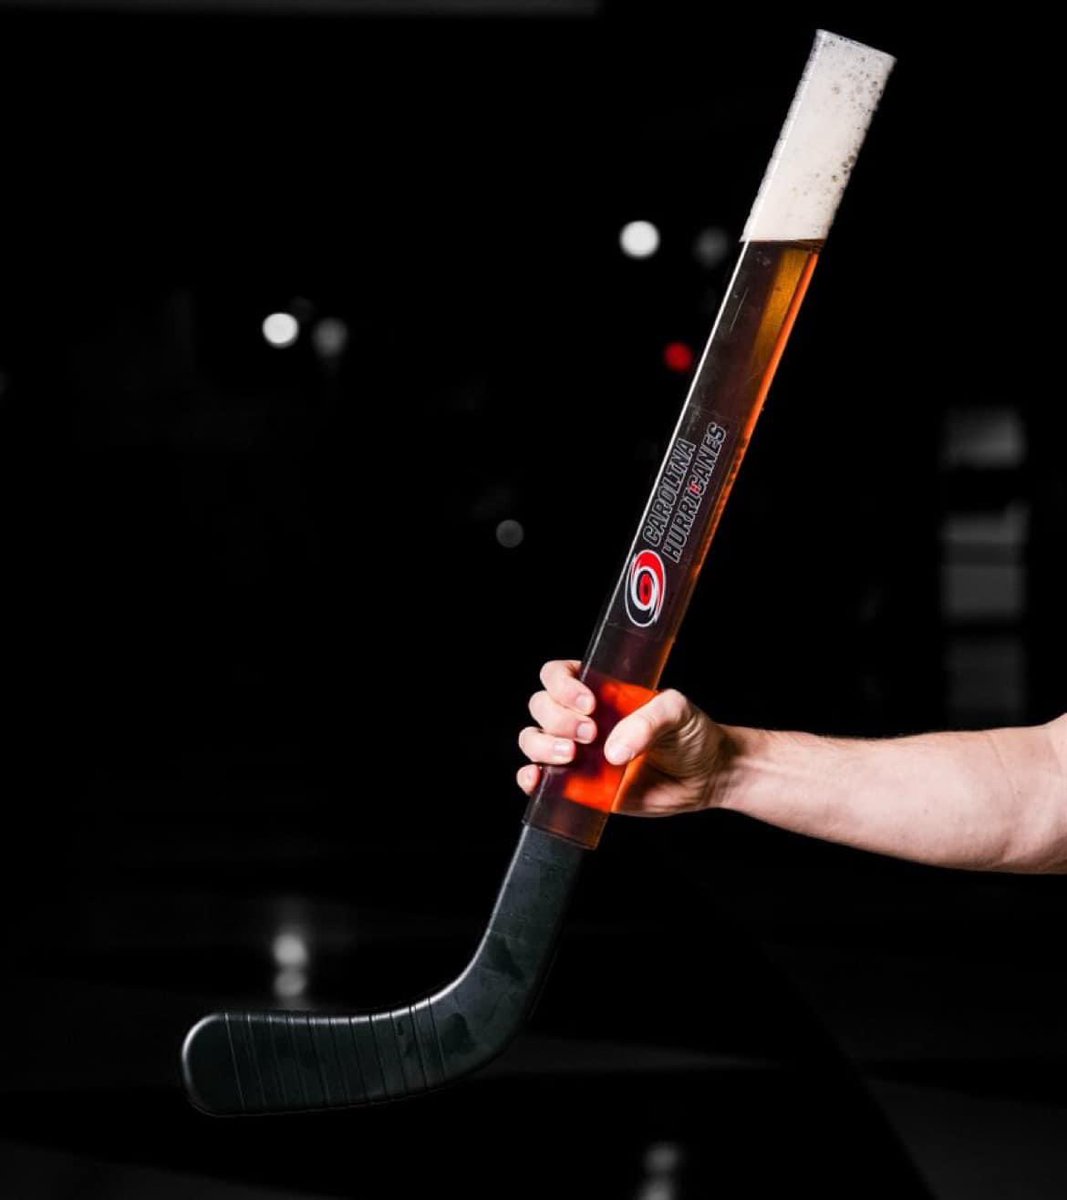 The Carolina Hurricanes are ahead of the curve. Introducing the beer stick.